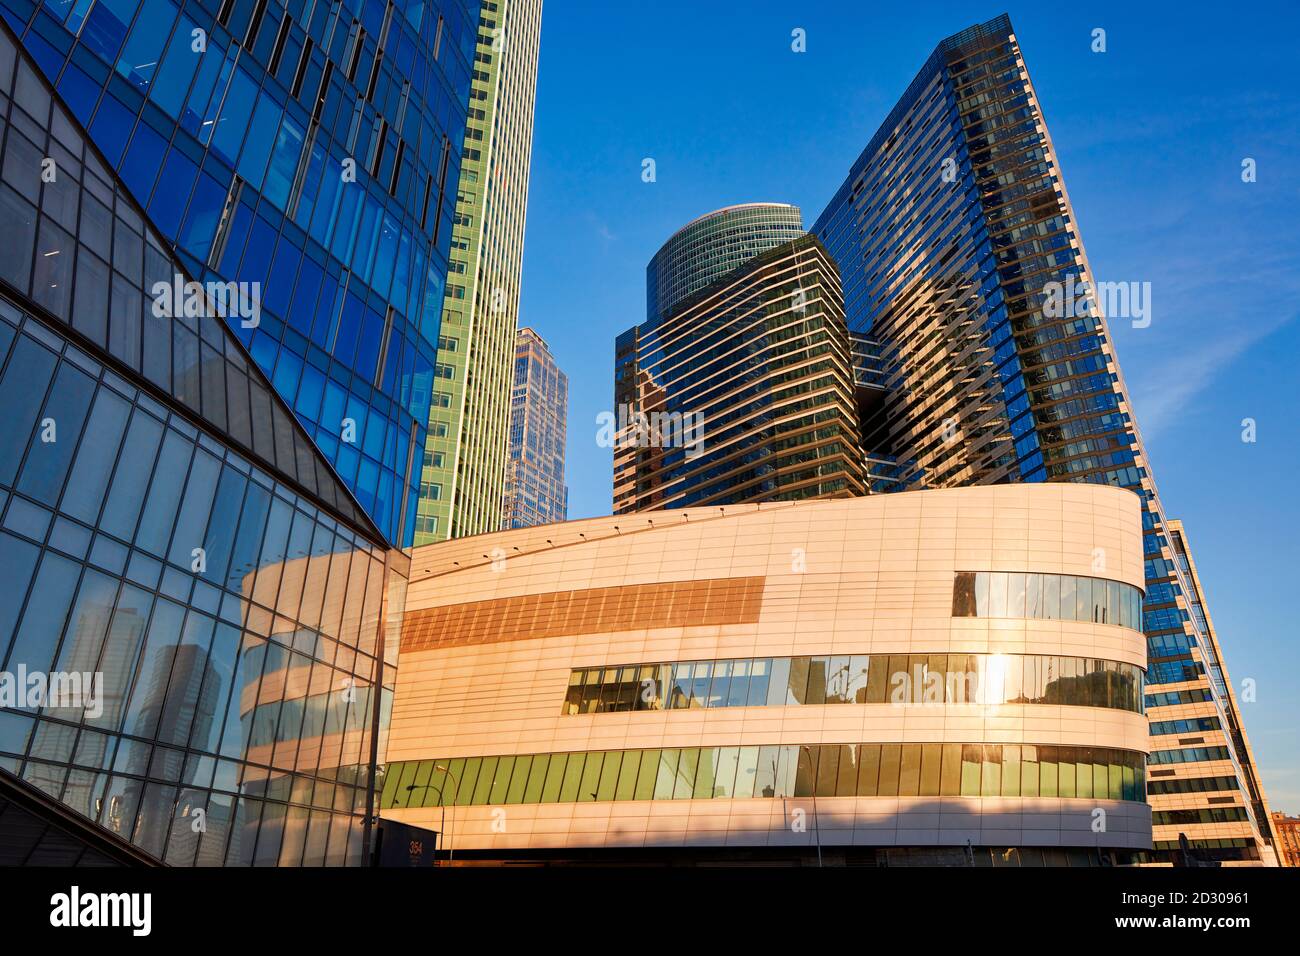 High rise modern buildings of Moscow International Business Centre (MIBC), also known as “Moscow City'. Moscow, Russia. Stock Photo